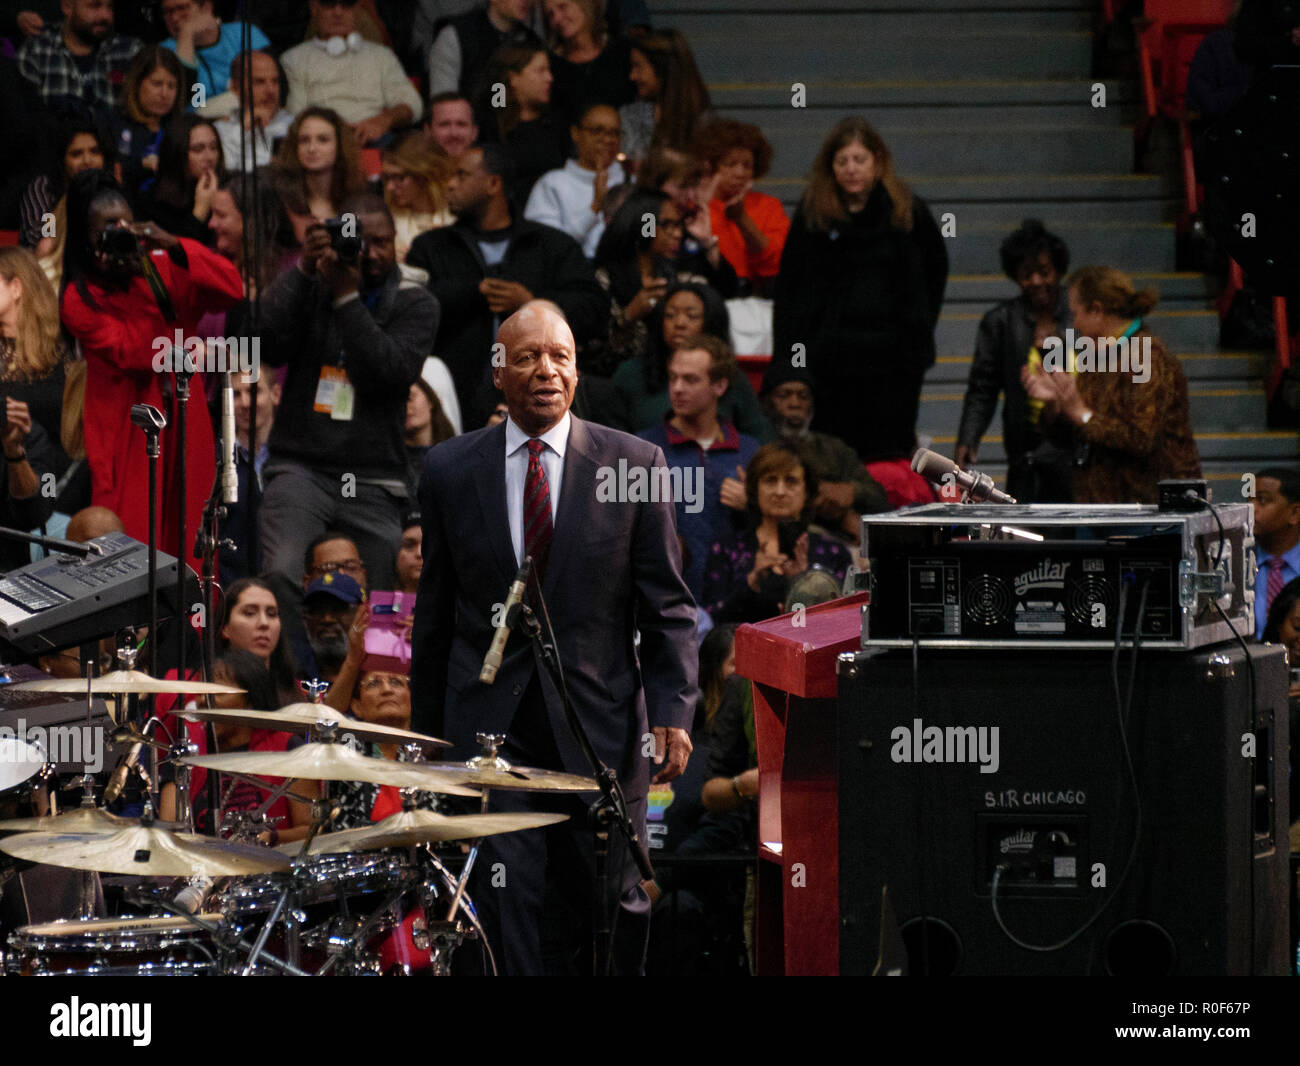 Chicago, Illinois, USA. 4th November 2018. Illinois Secretary of State Jesse White approaches the podium at today's rally. The rally was a final push preceding the upcoming midterm general election this Tuesday, which many expect will be a wave election in favor of the Democrats. Credit: Todd Bannor/Alamy Live News Stock Photo